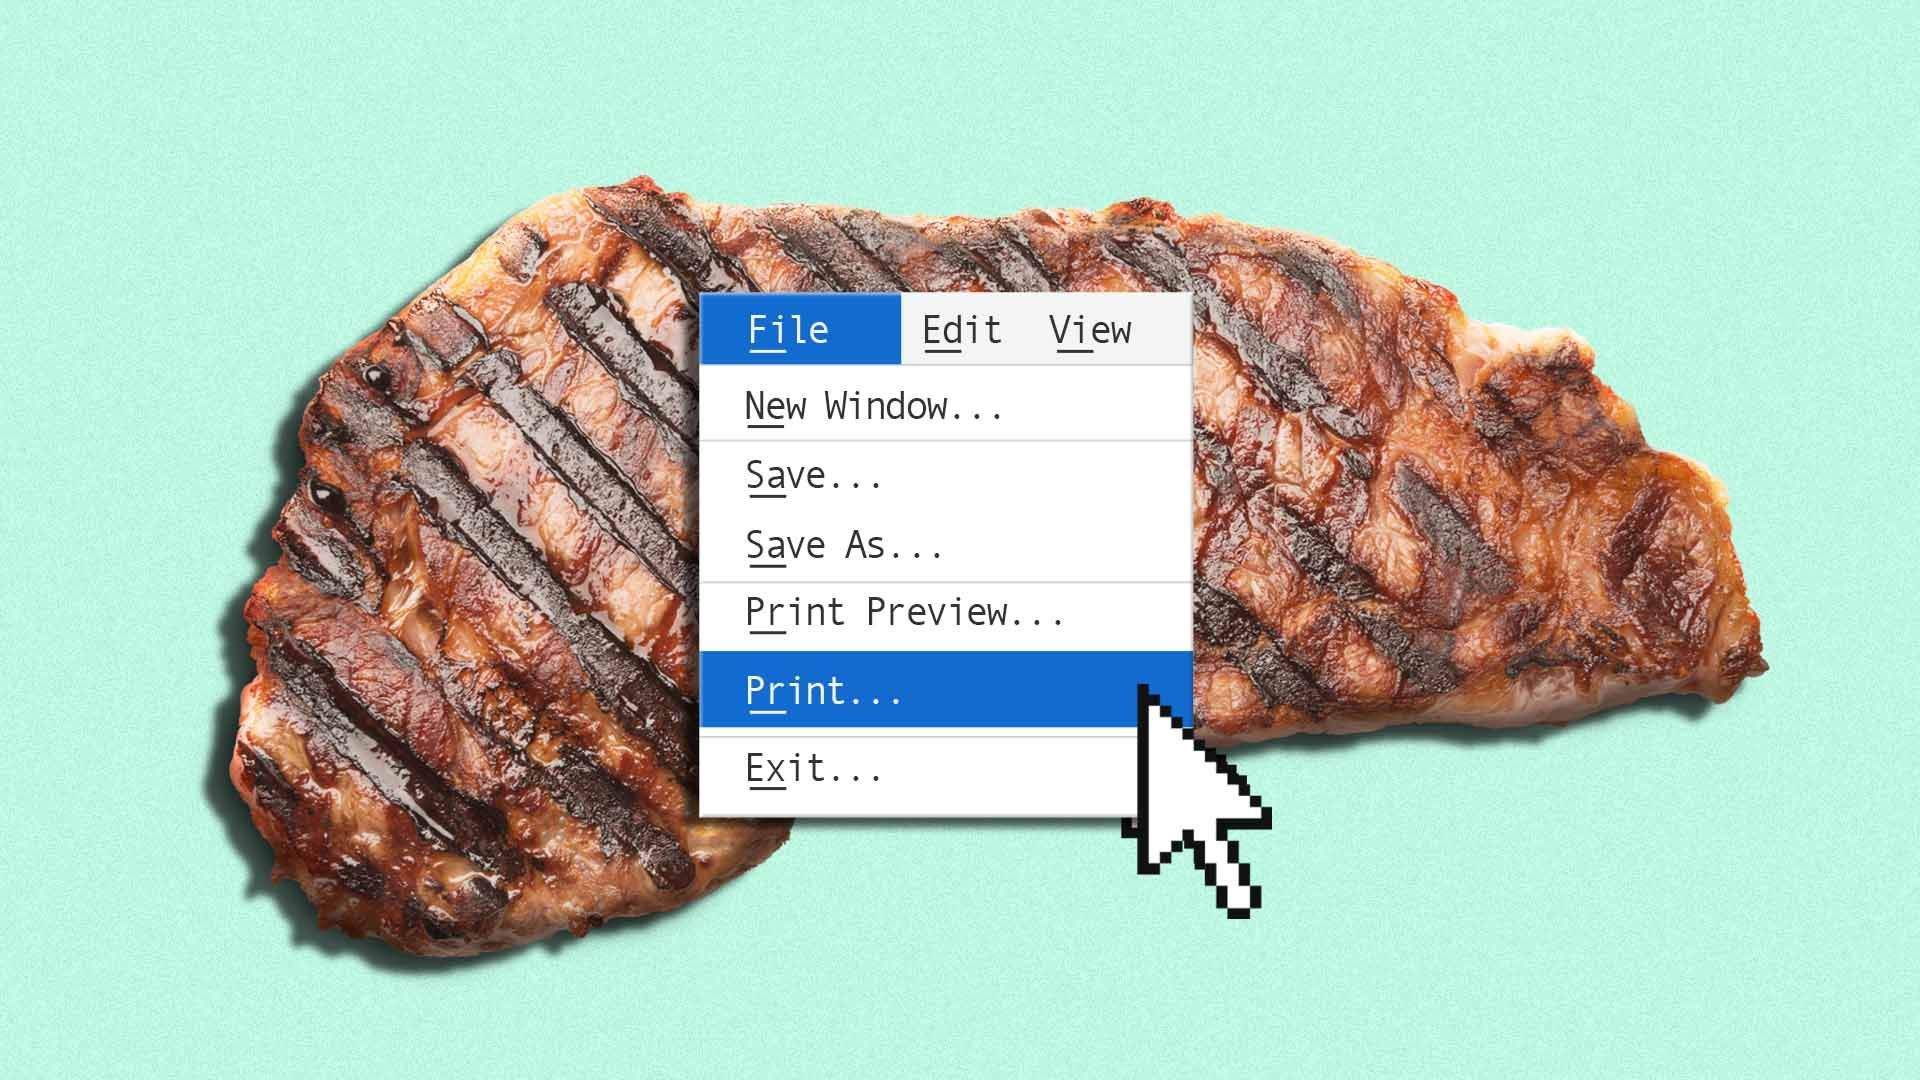 Illustration of a piece of cooked steak with a cursor on a computer dialogue box selecting "print"